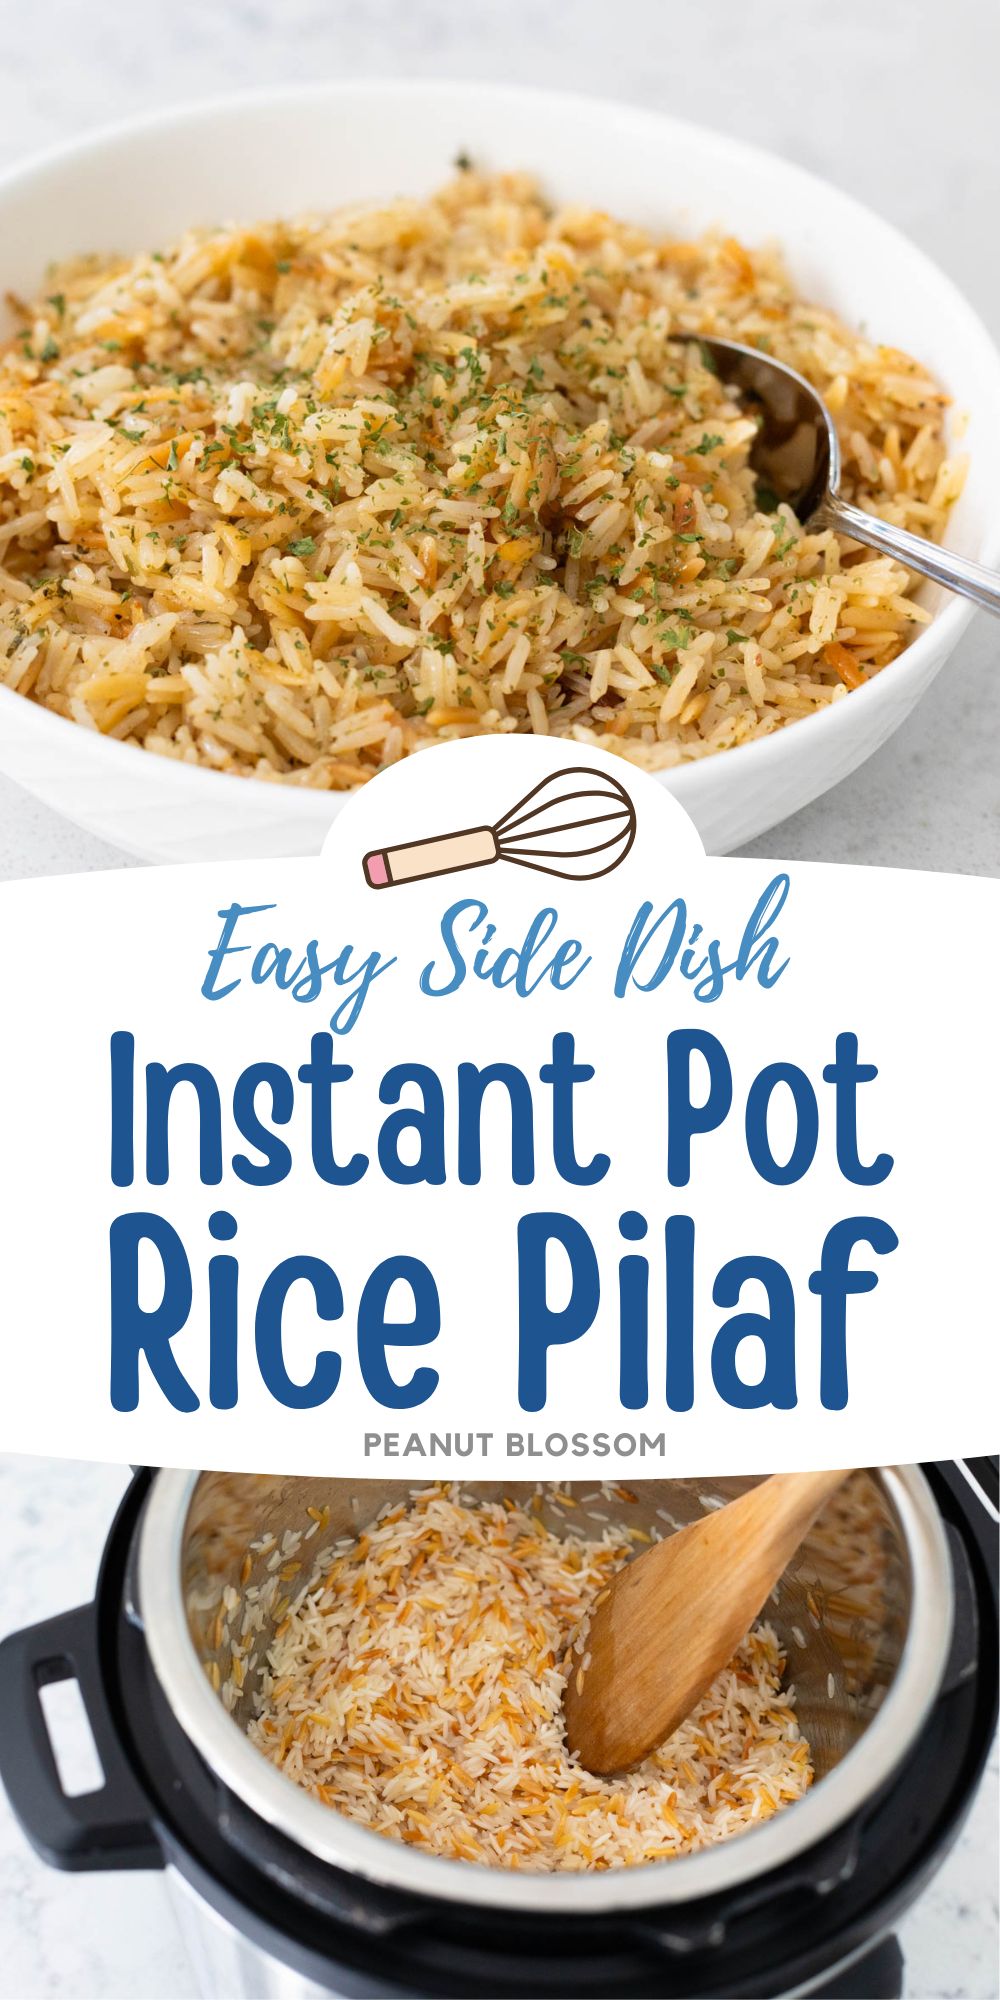 The photo collage shows the rice pilaf cooking in the Instant pot and in a serving bowl.